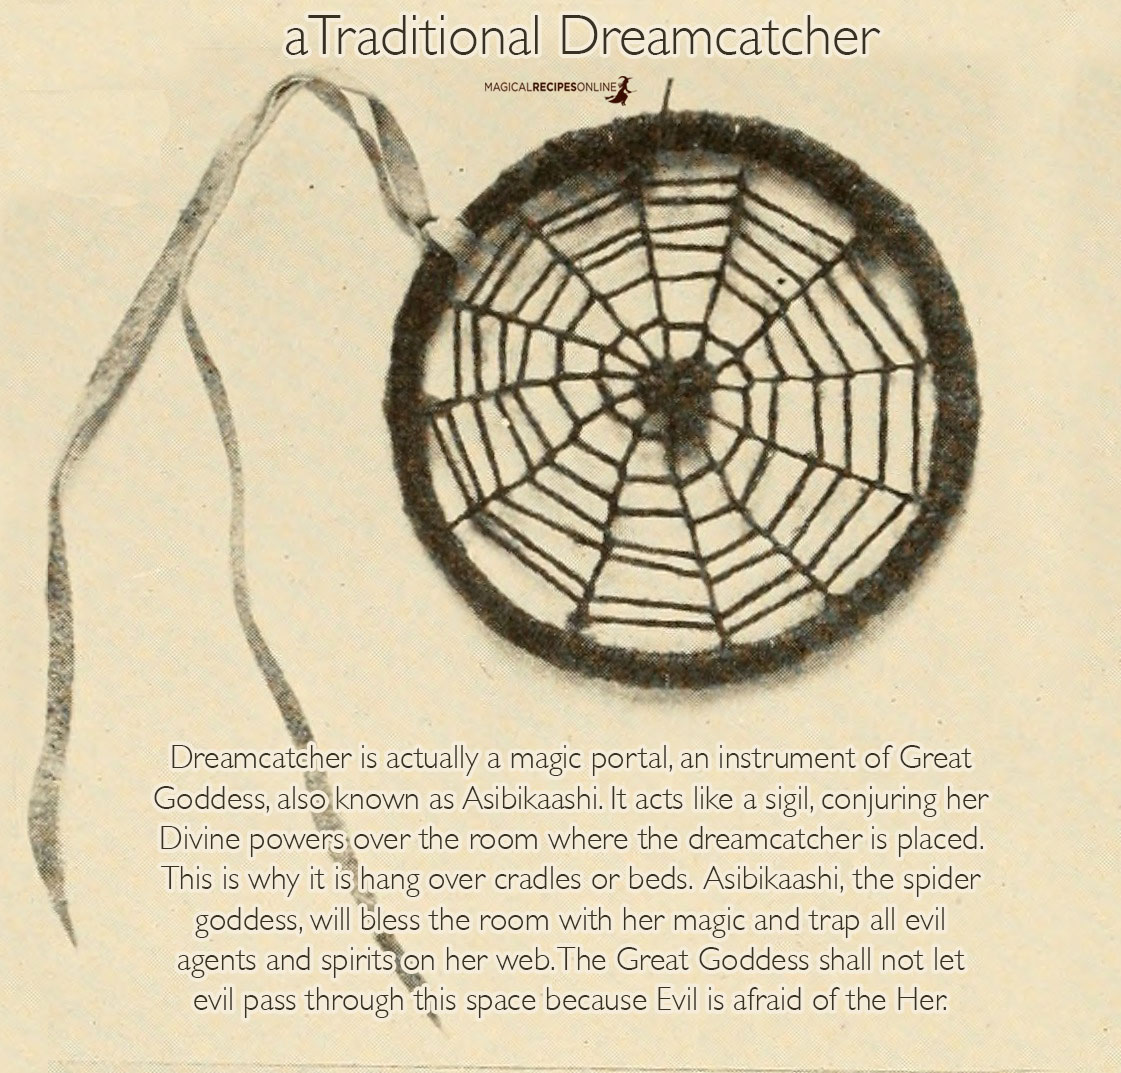 What is a Dreamcatcher and how does it Work?